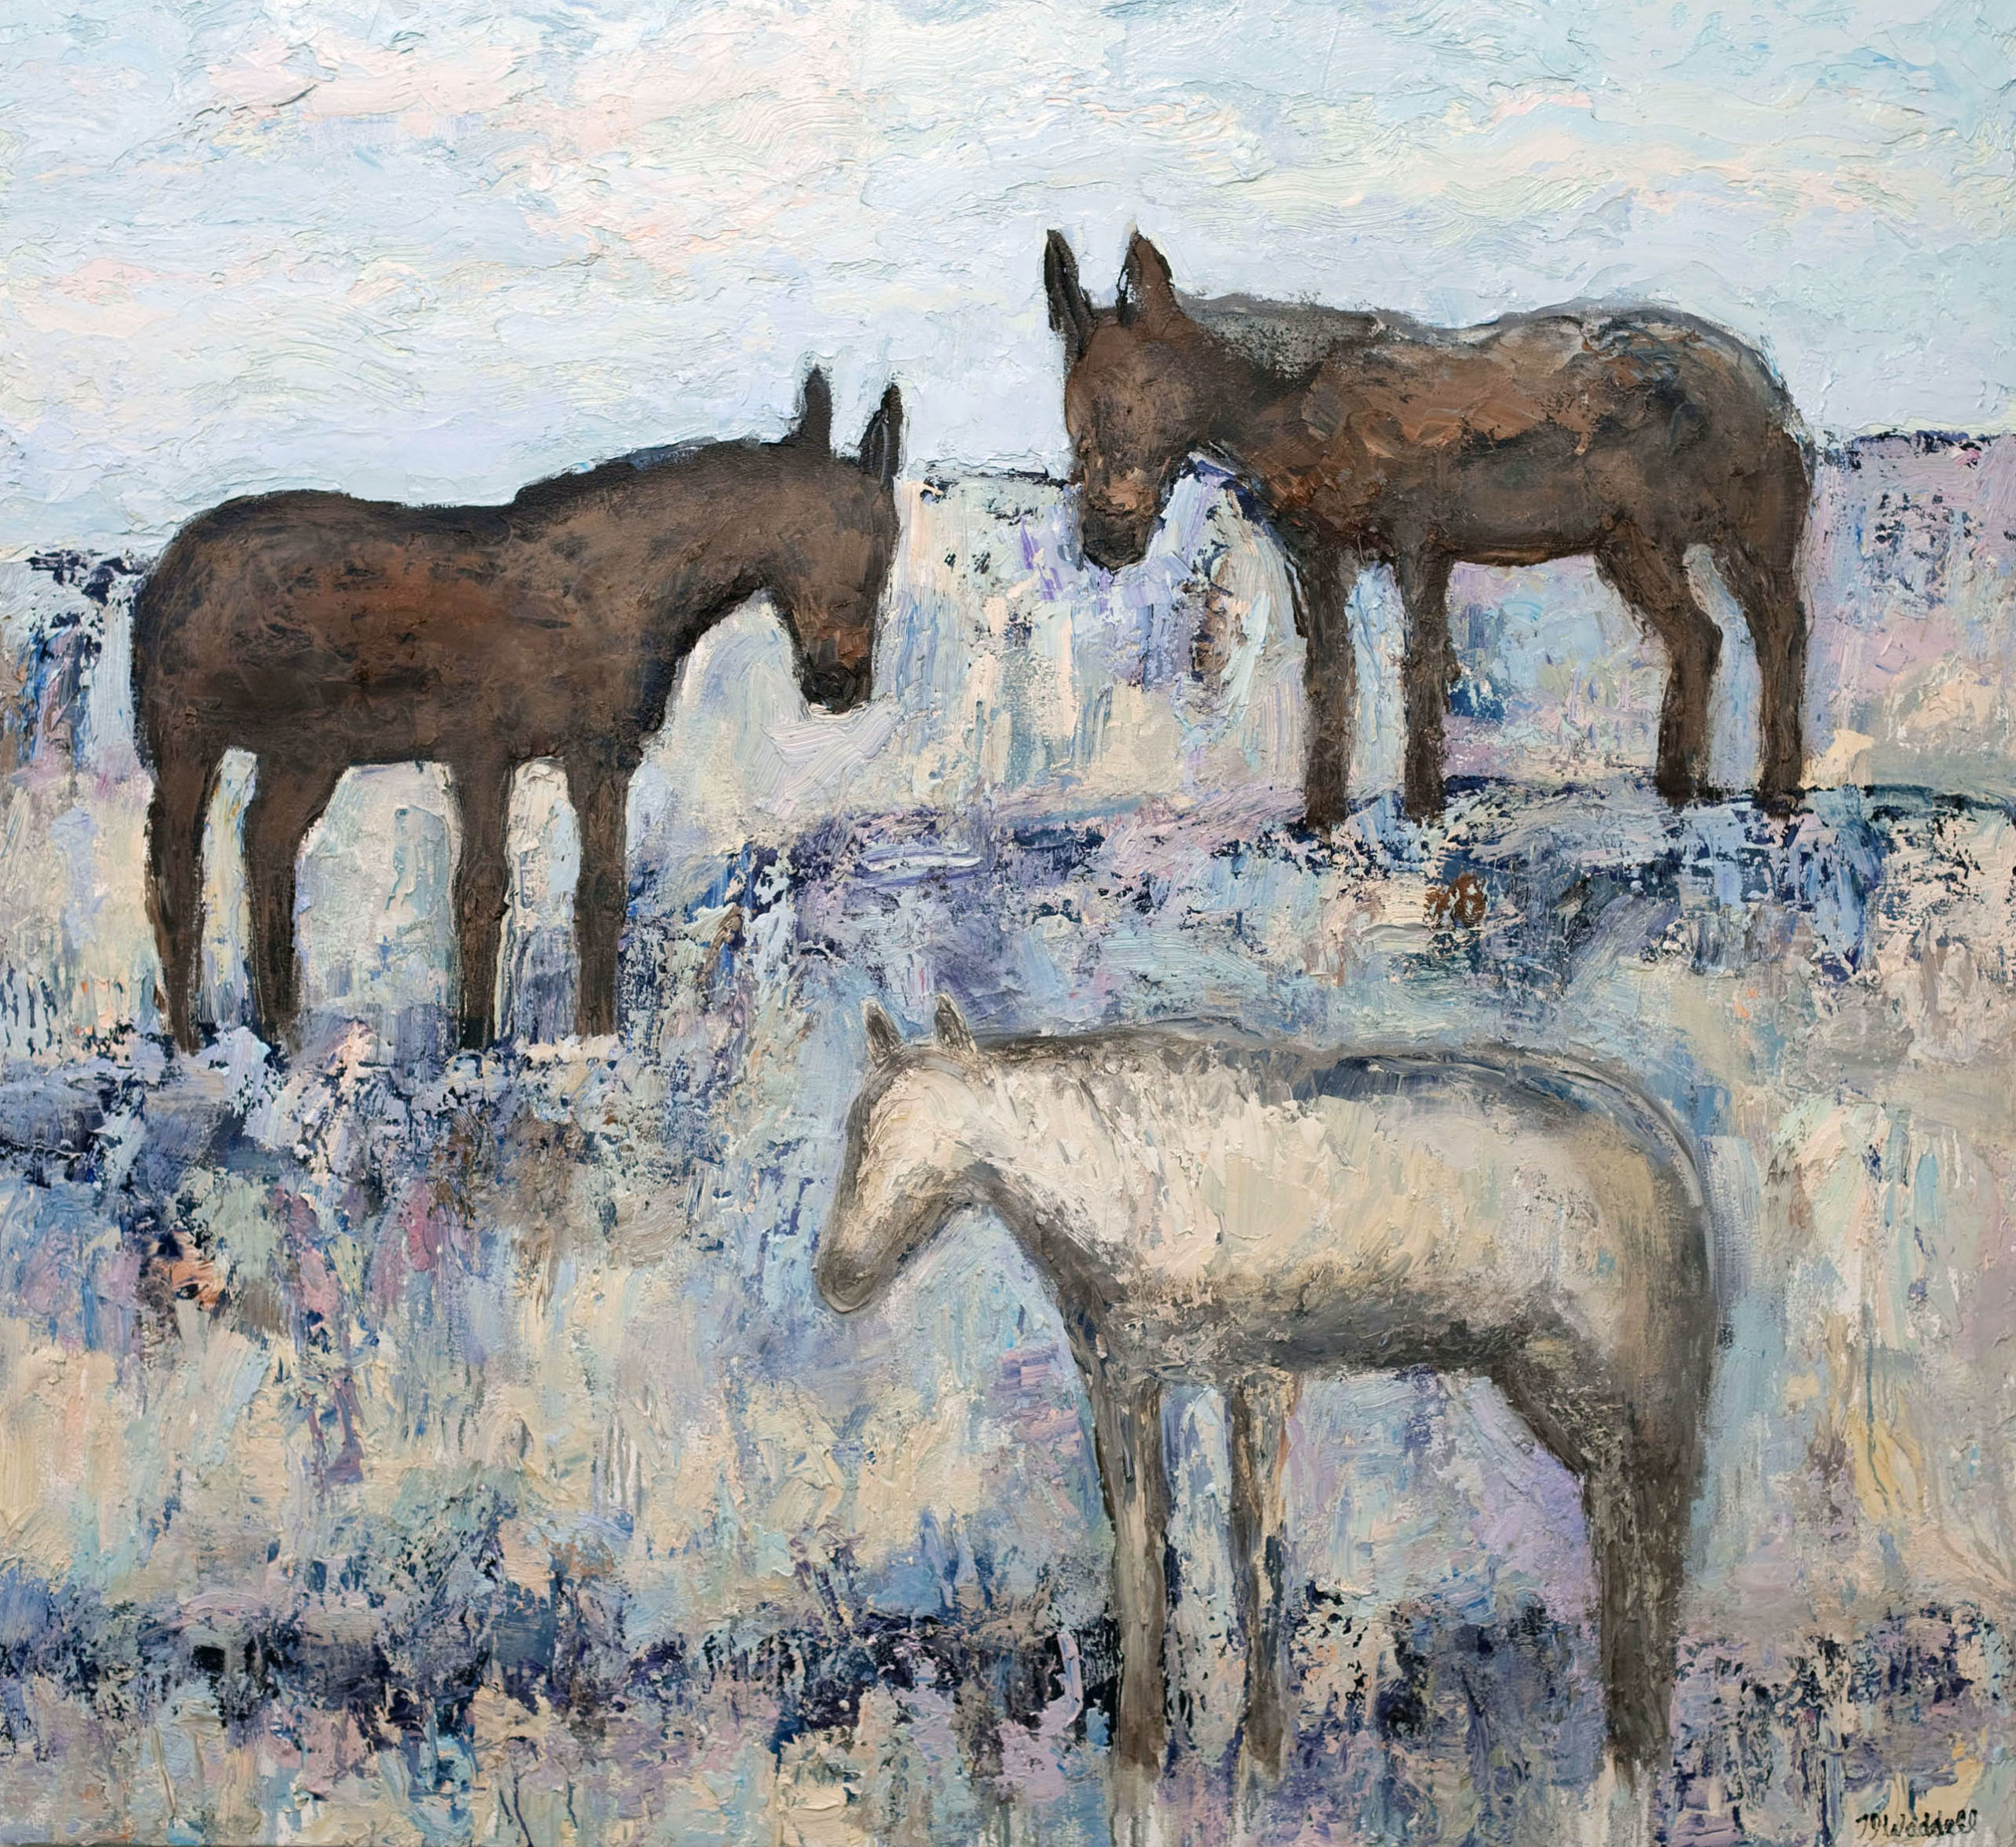 

											Theodore Waddell</b>

											<em>
												Theodore Waddell</em> 

											<h4>
												December 4 - February 13, 2020											</h4>

		                																																													<i>Mariah and the Mules,</i>  
																																																					oil and encaustic on canvas, 
																																								66 x 72 inches 
																								
		                				